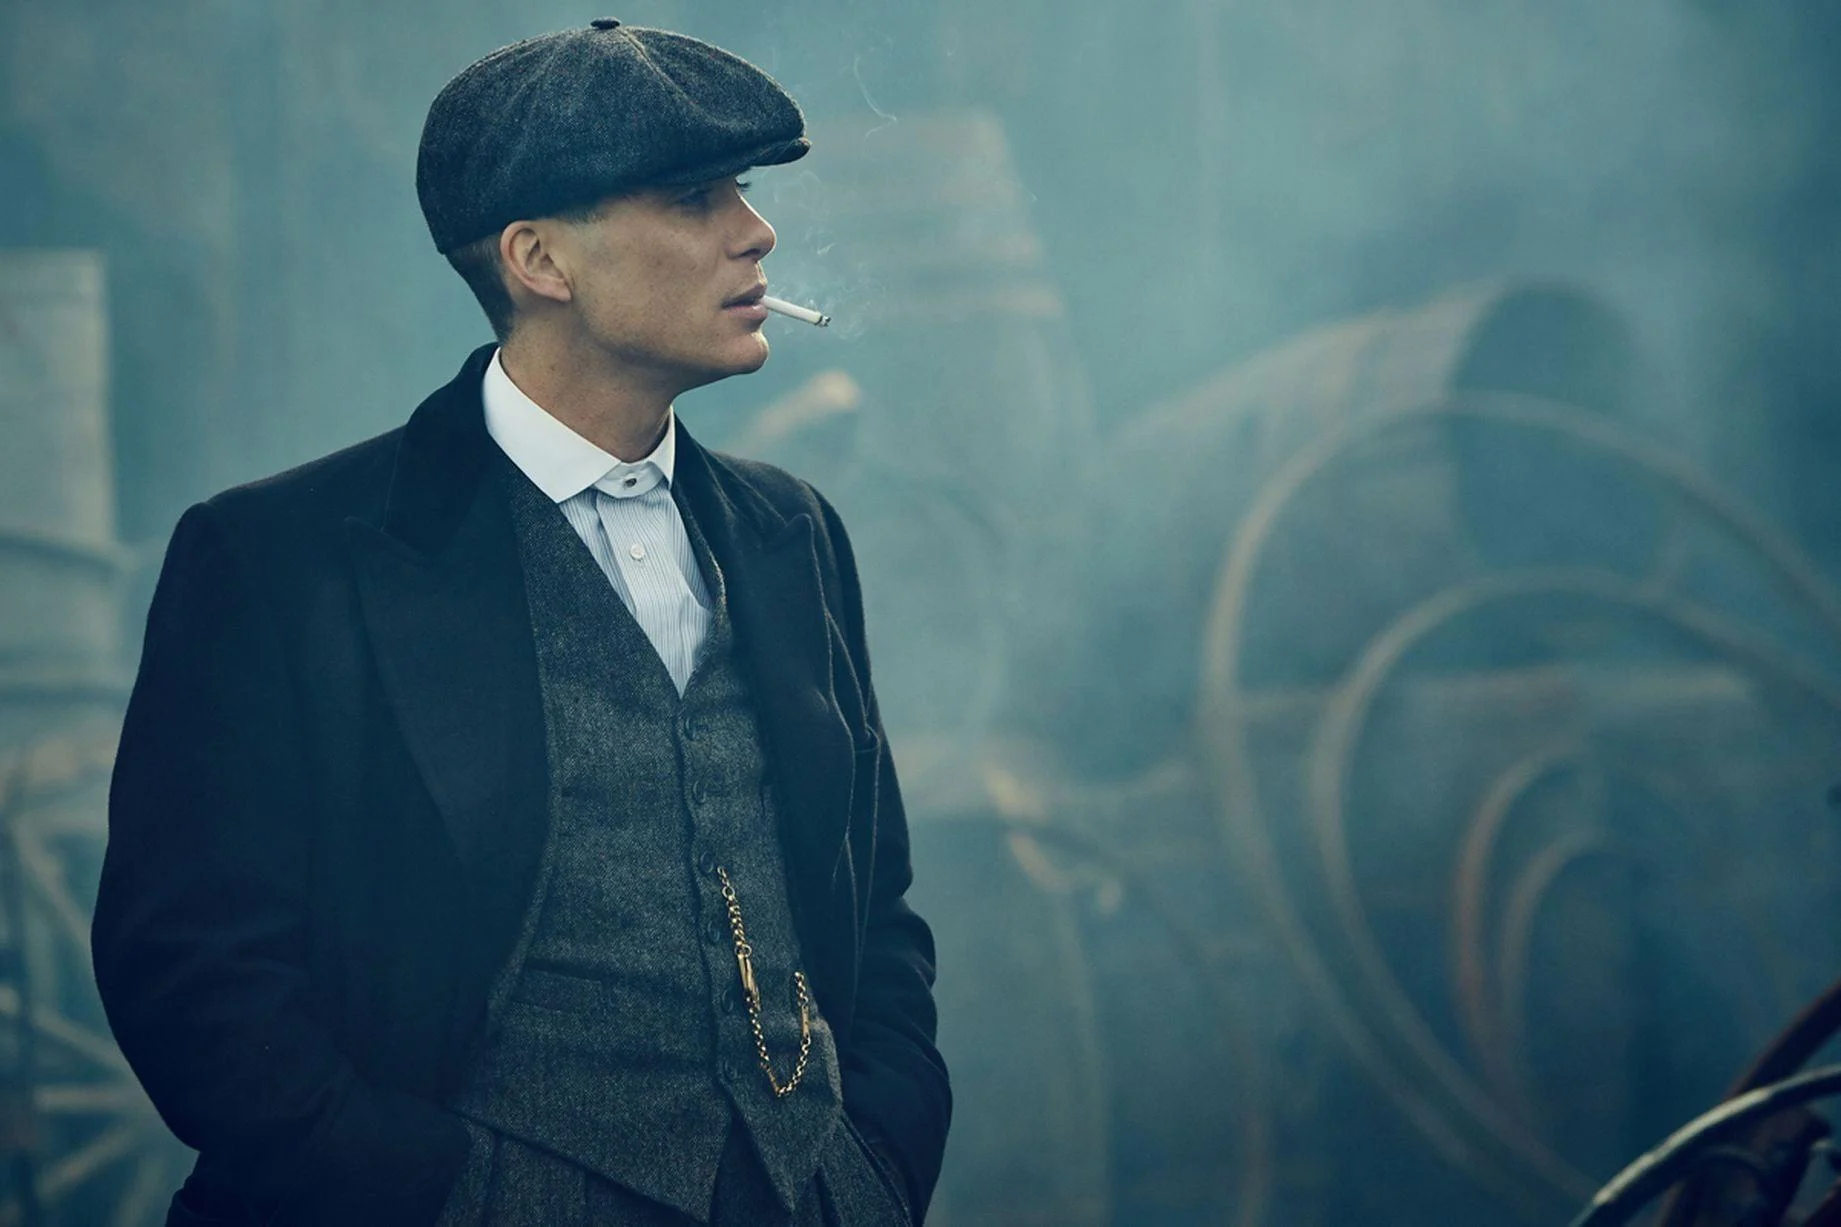 Cillian Murphy to play the lead role in Christopher Nolan's Oppenheimer (2023).